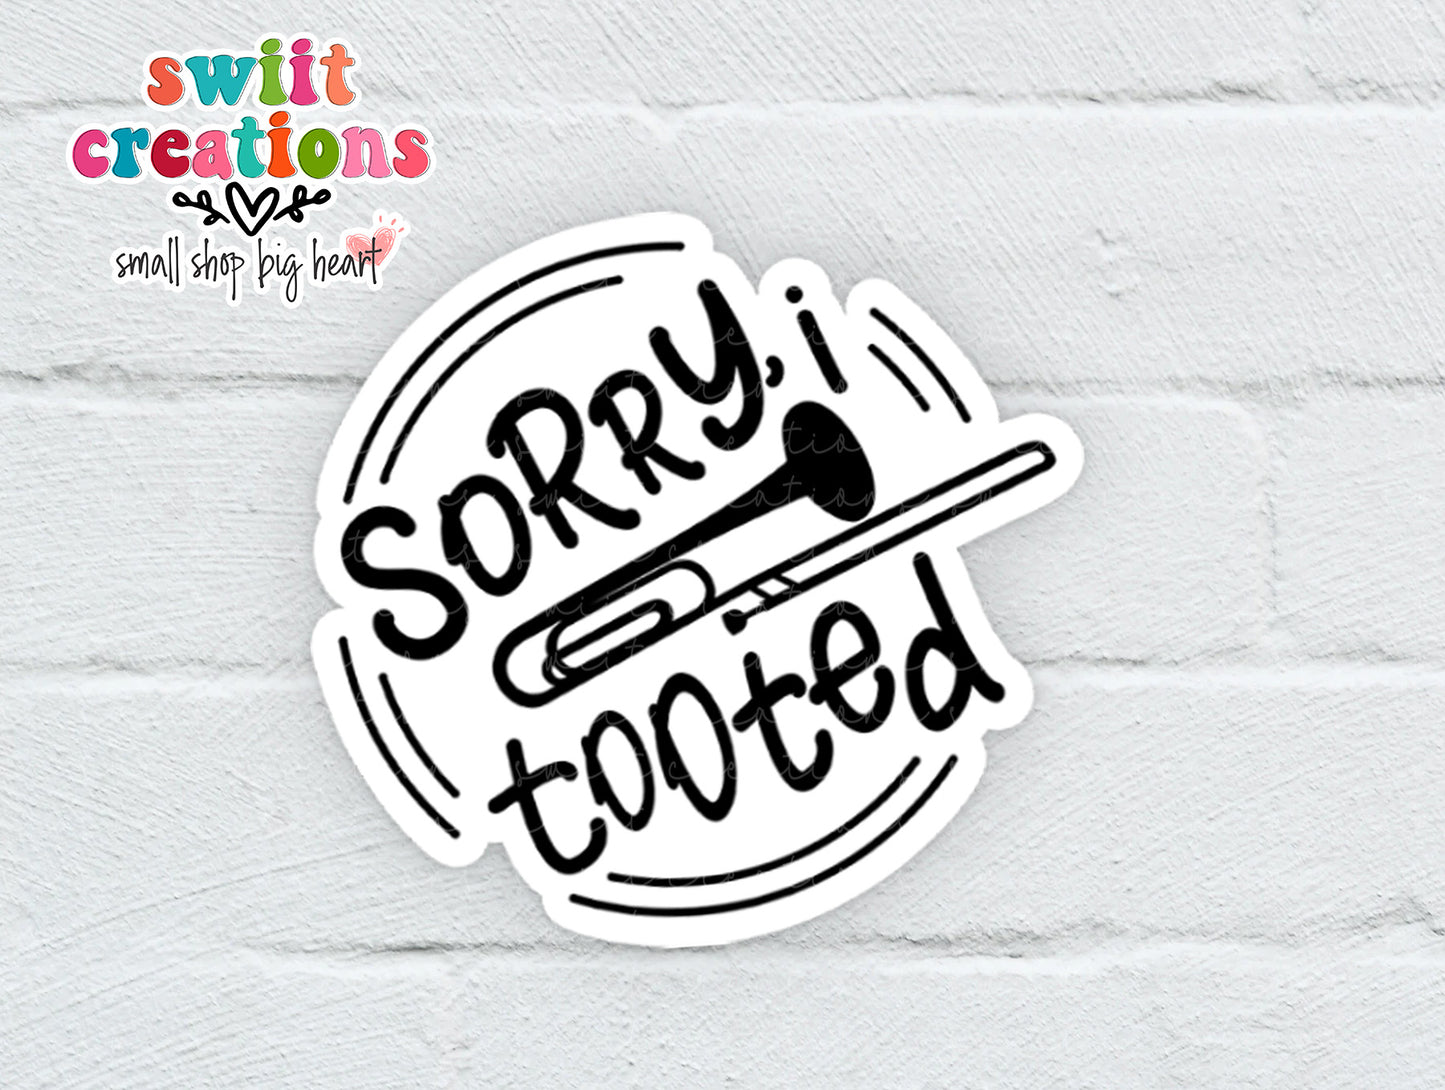 Sorry I Tooted Waterproof Sticker    (SS736) | SCD736